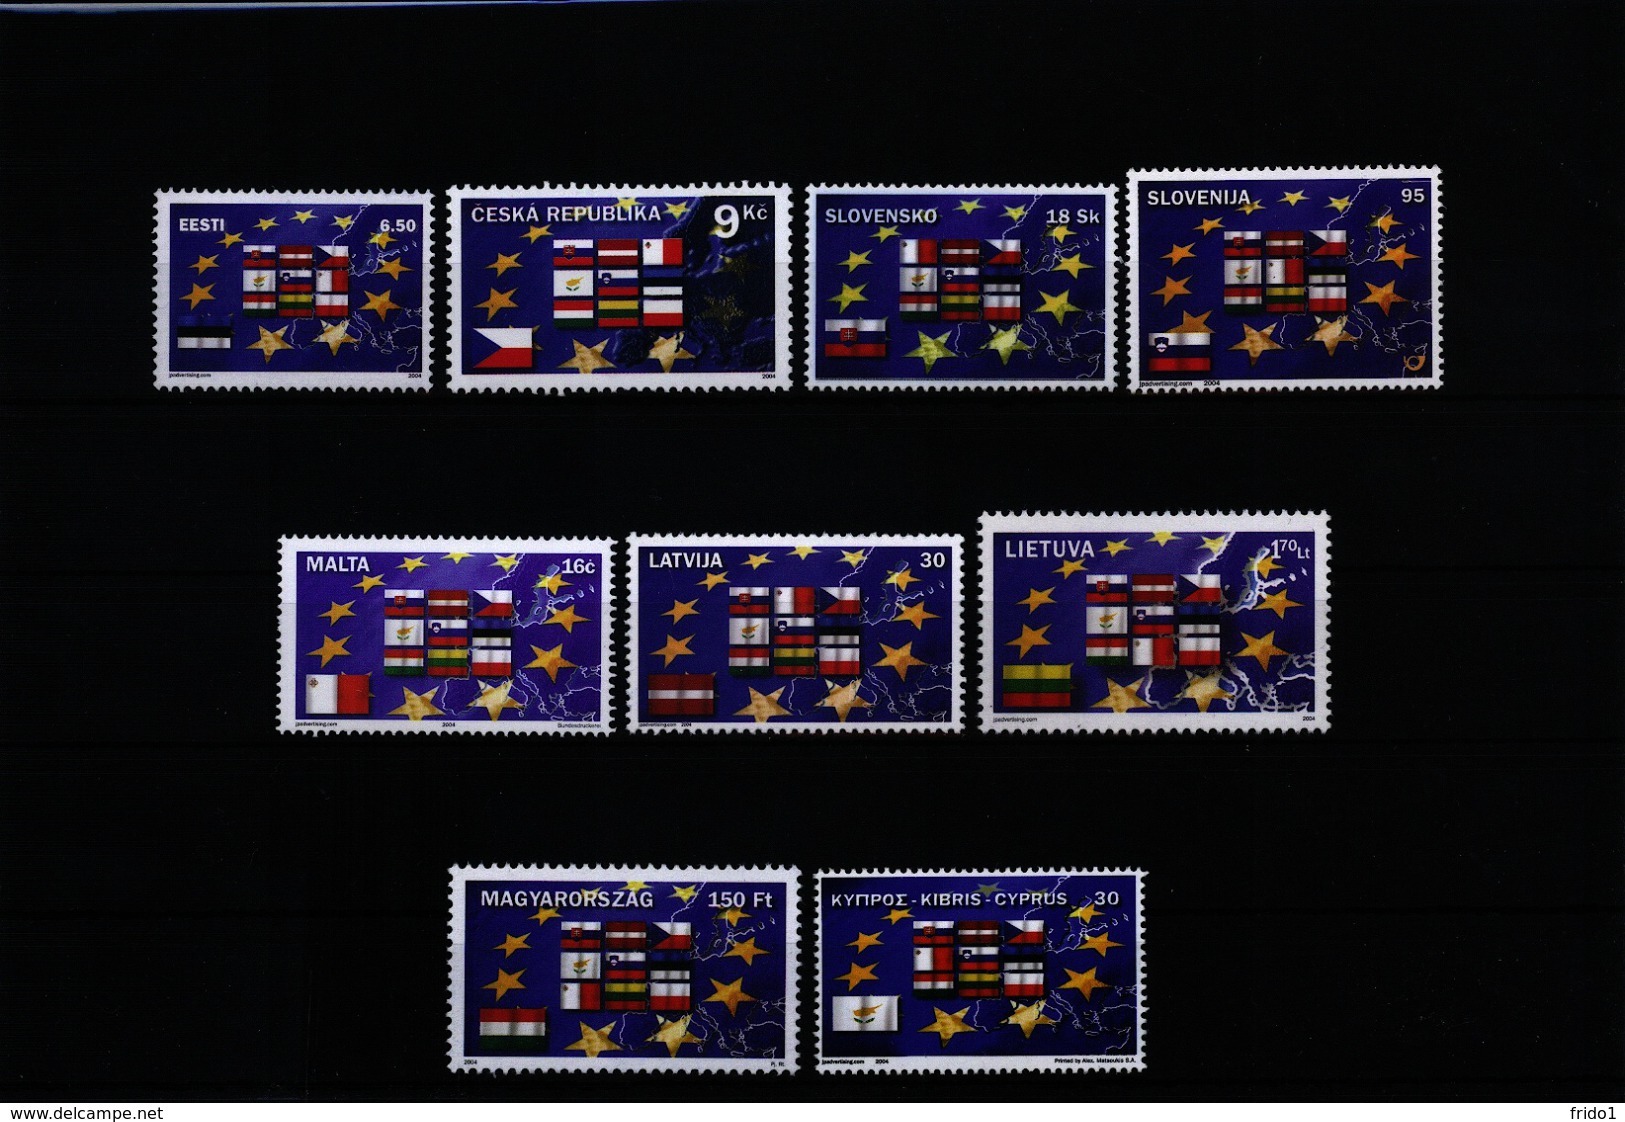 Entry Of 9 Countries To European Union 2004 MNH - 2004